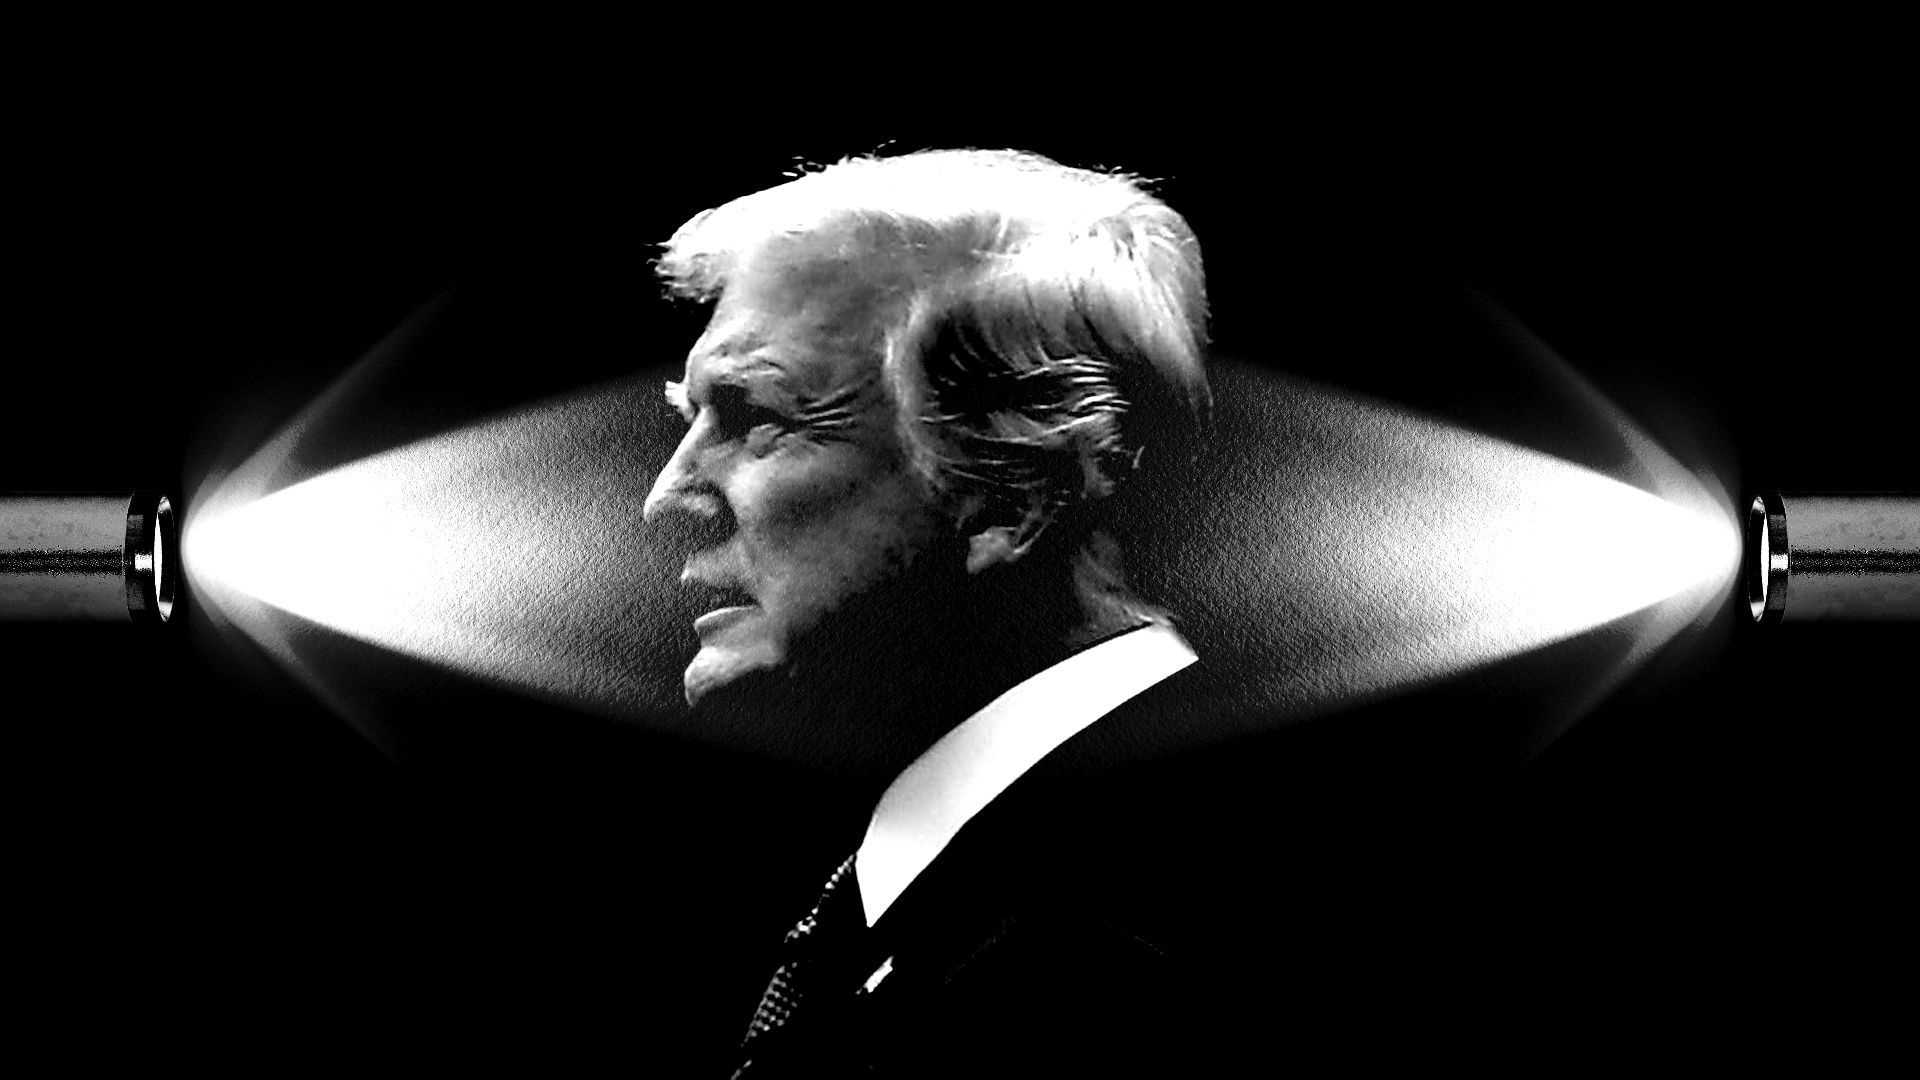 A black-and-white illustration of President Trump between spotlights.